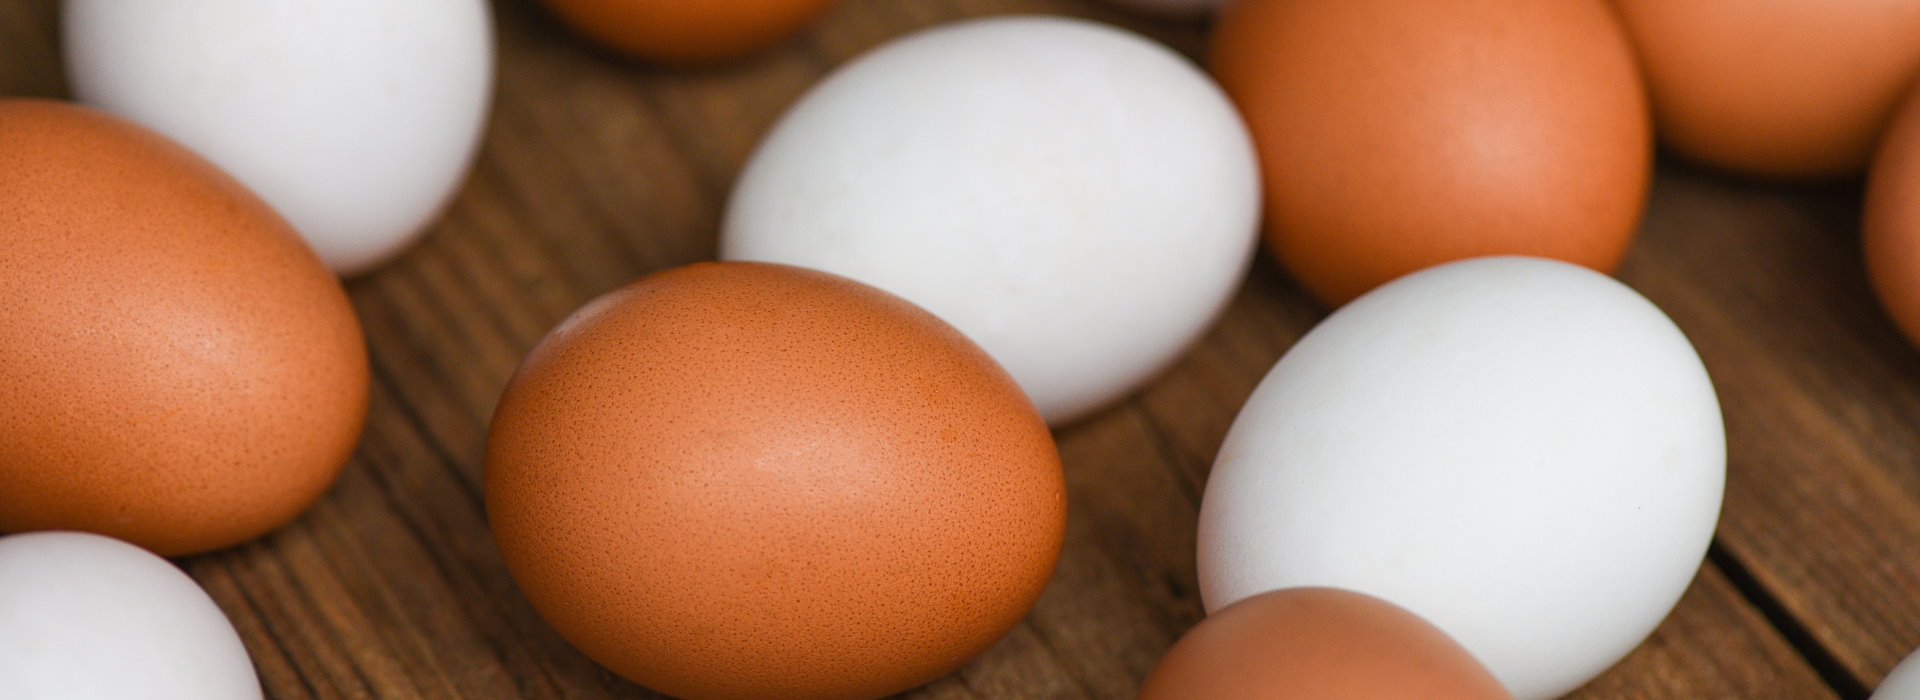 Will Eating Eggs Raise Your Cholesterol